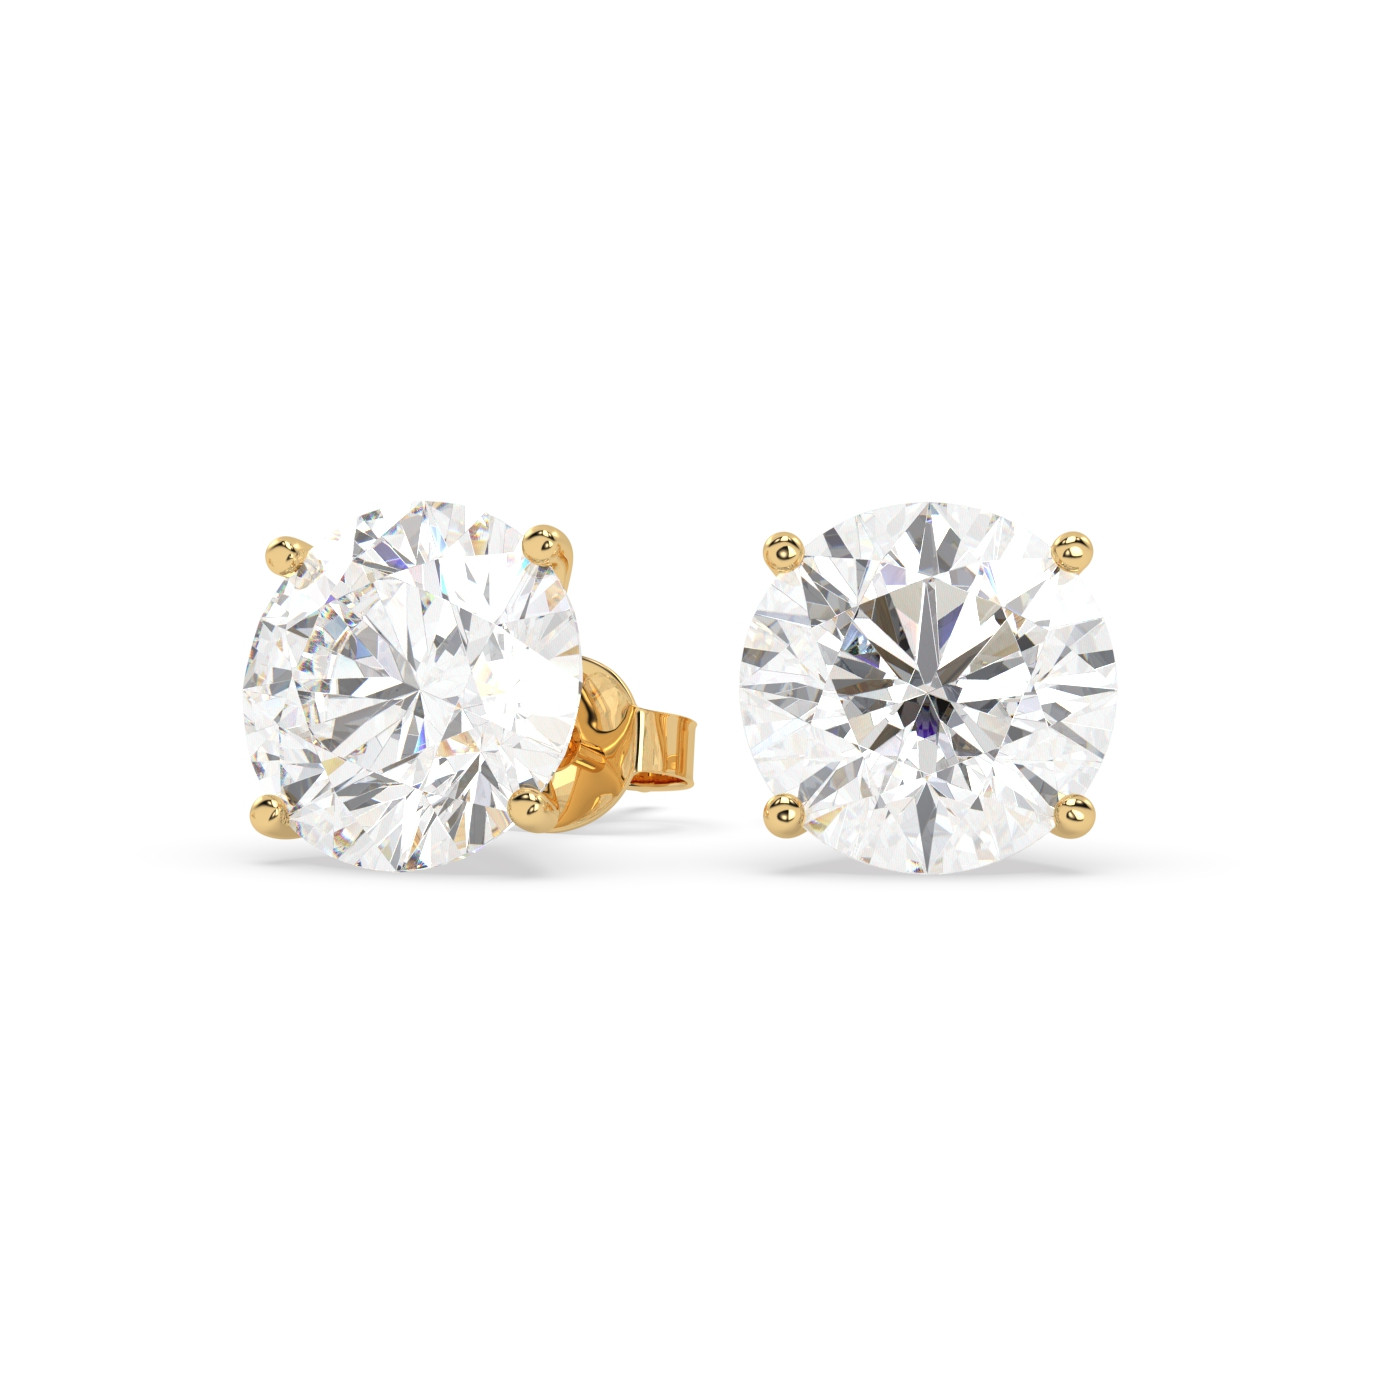 18K YELLOW GOLD Round Stud Earrings with butterfly back